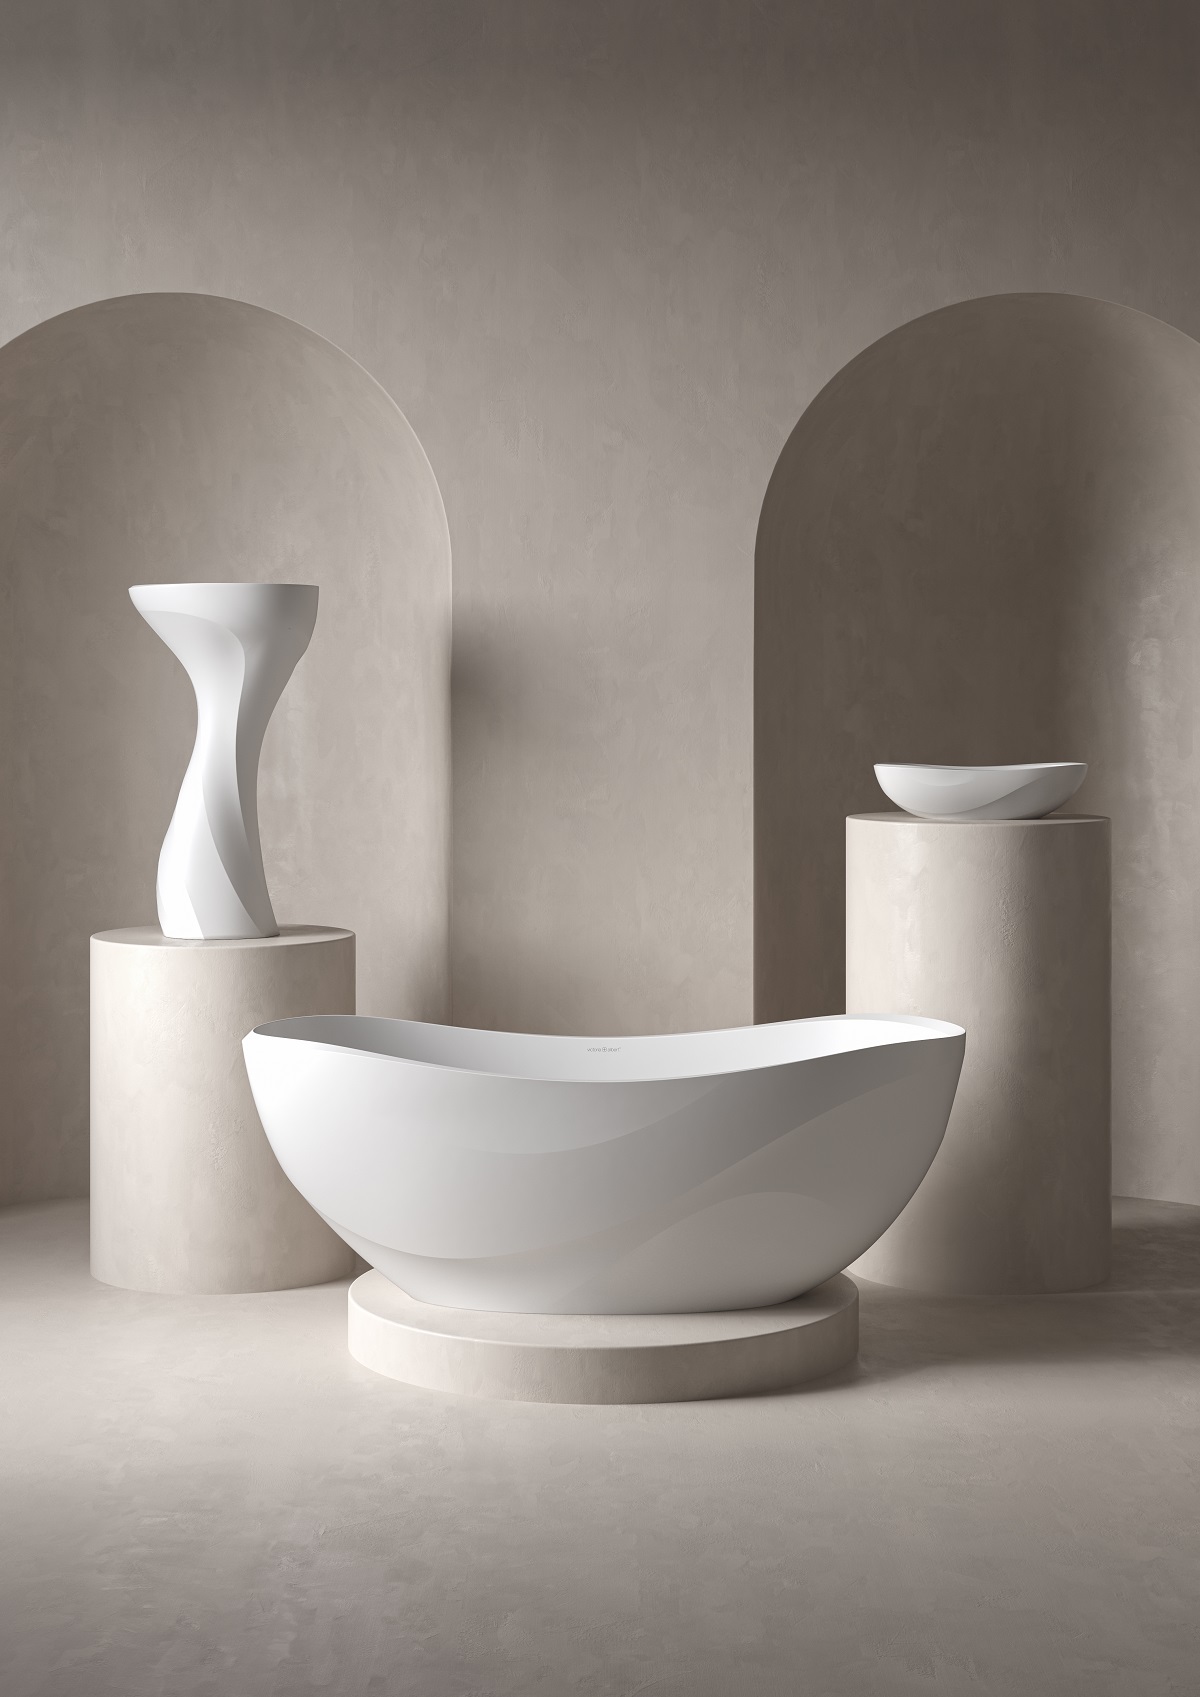 the Seros bathroom collection in gallery display